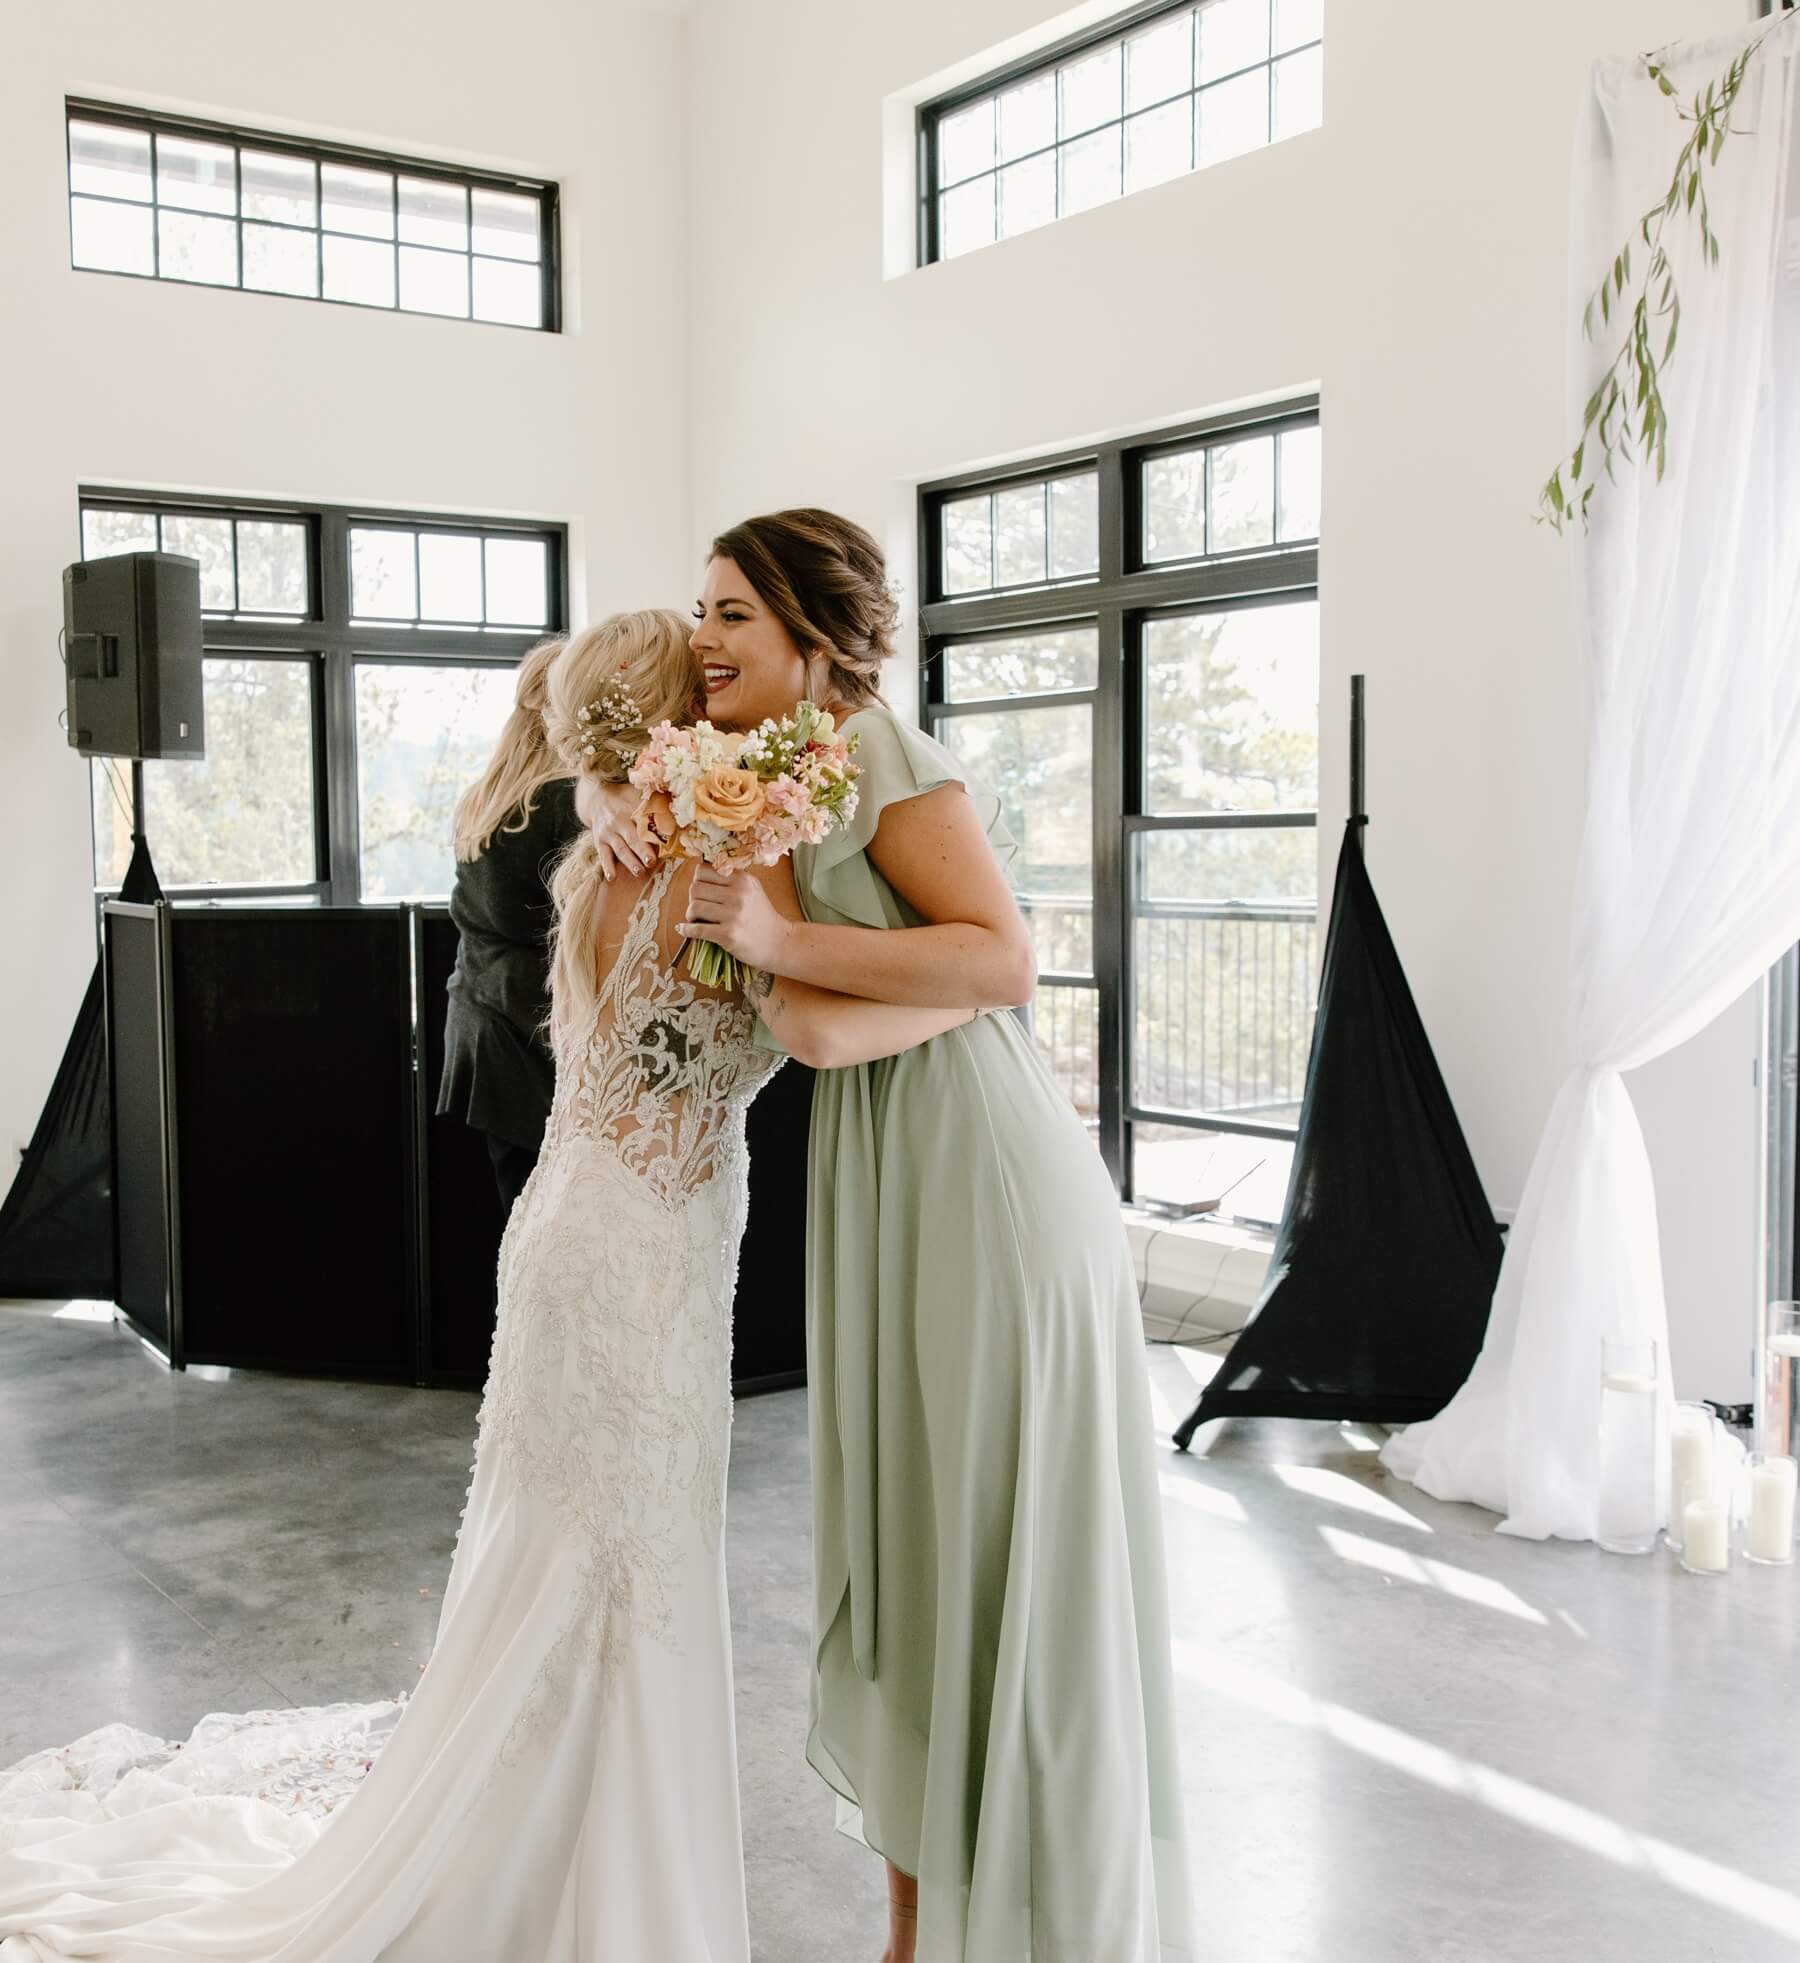 Bride and maid of honor hugging during reception